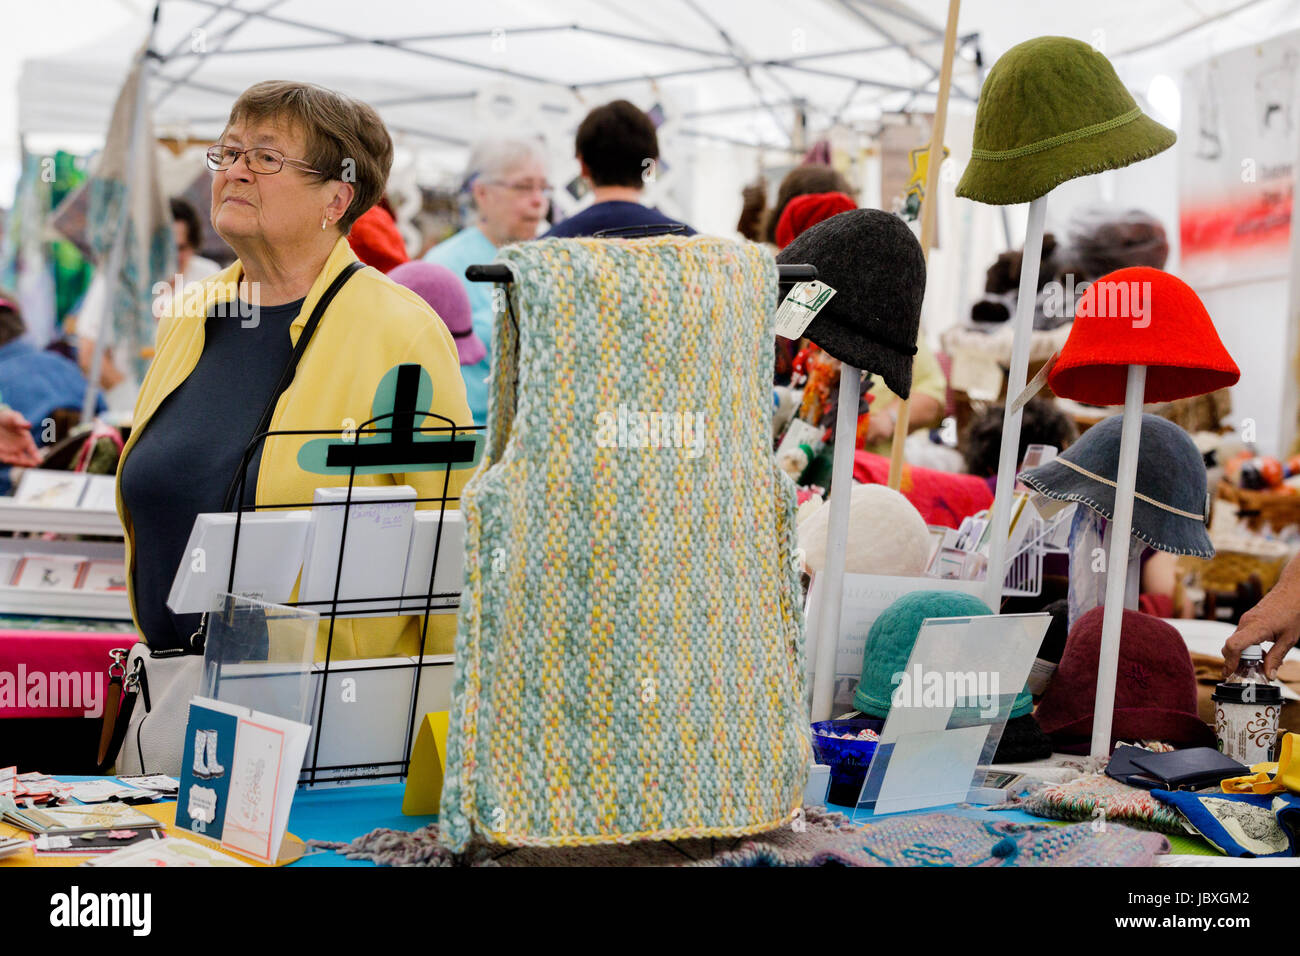 BOUCKVILLE, NY, USA - JUNE 10 2017: Hand made and hand dyed wool vest and hats for sale at the annual Fiber Festival of Central New York. Stock Photo